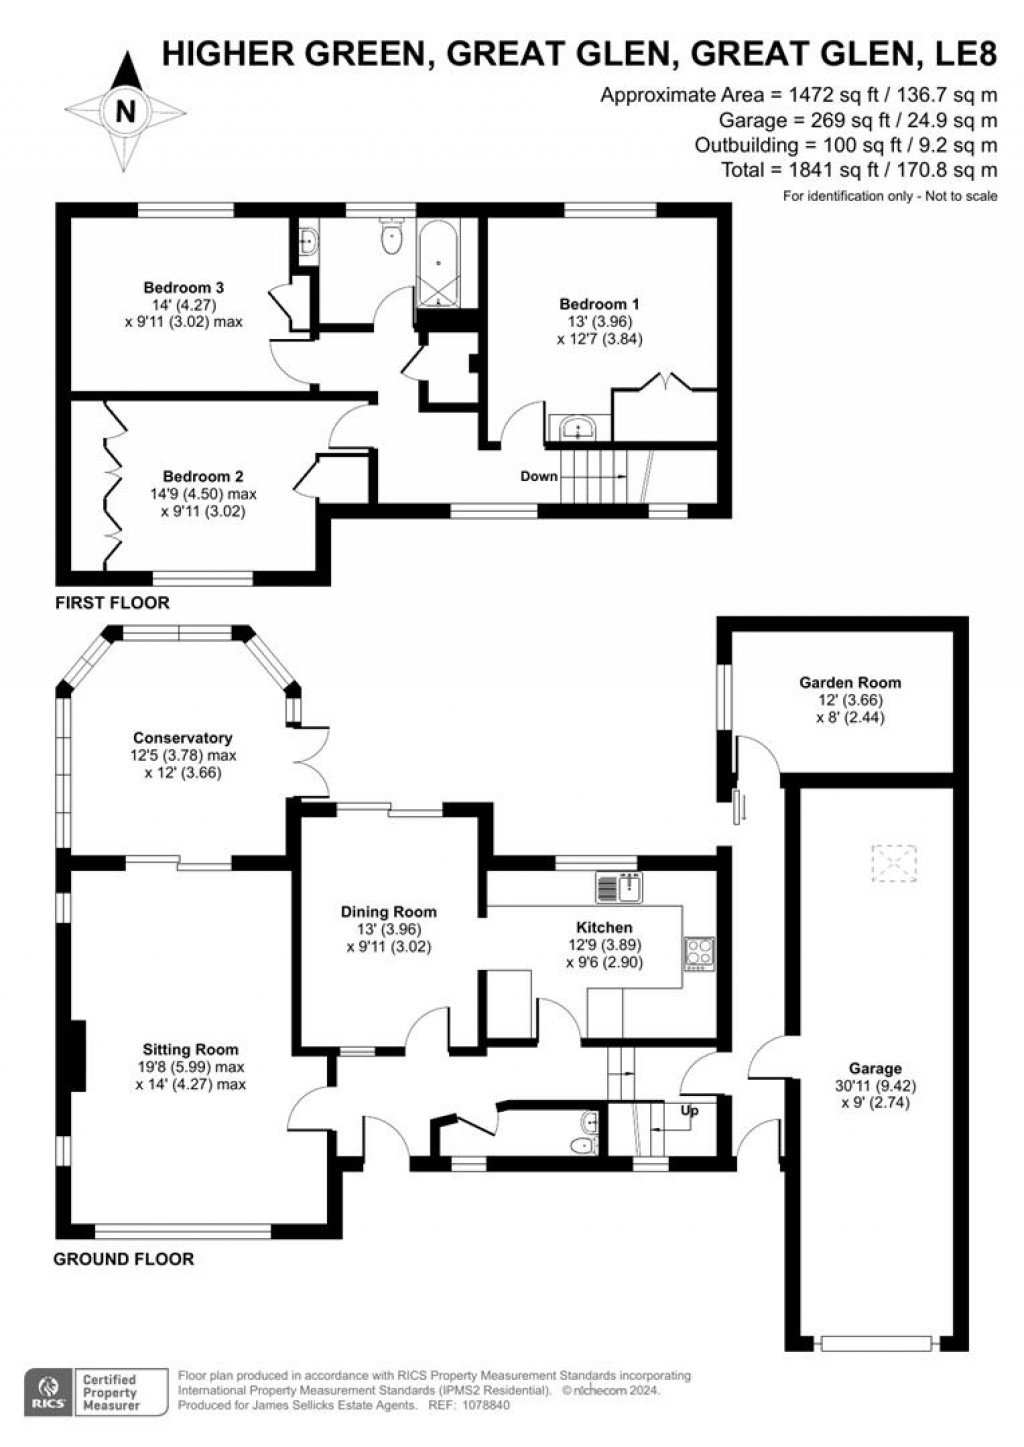 Floorplans For Higher Green, Great Glen, Leicestershire